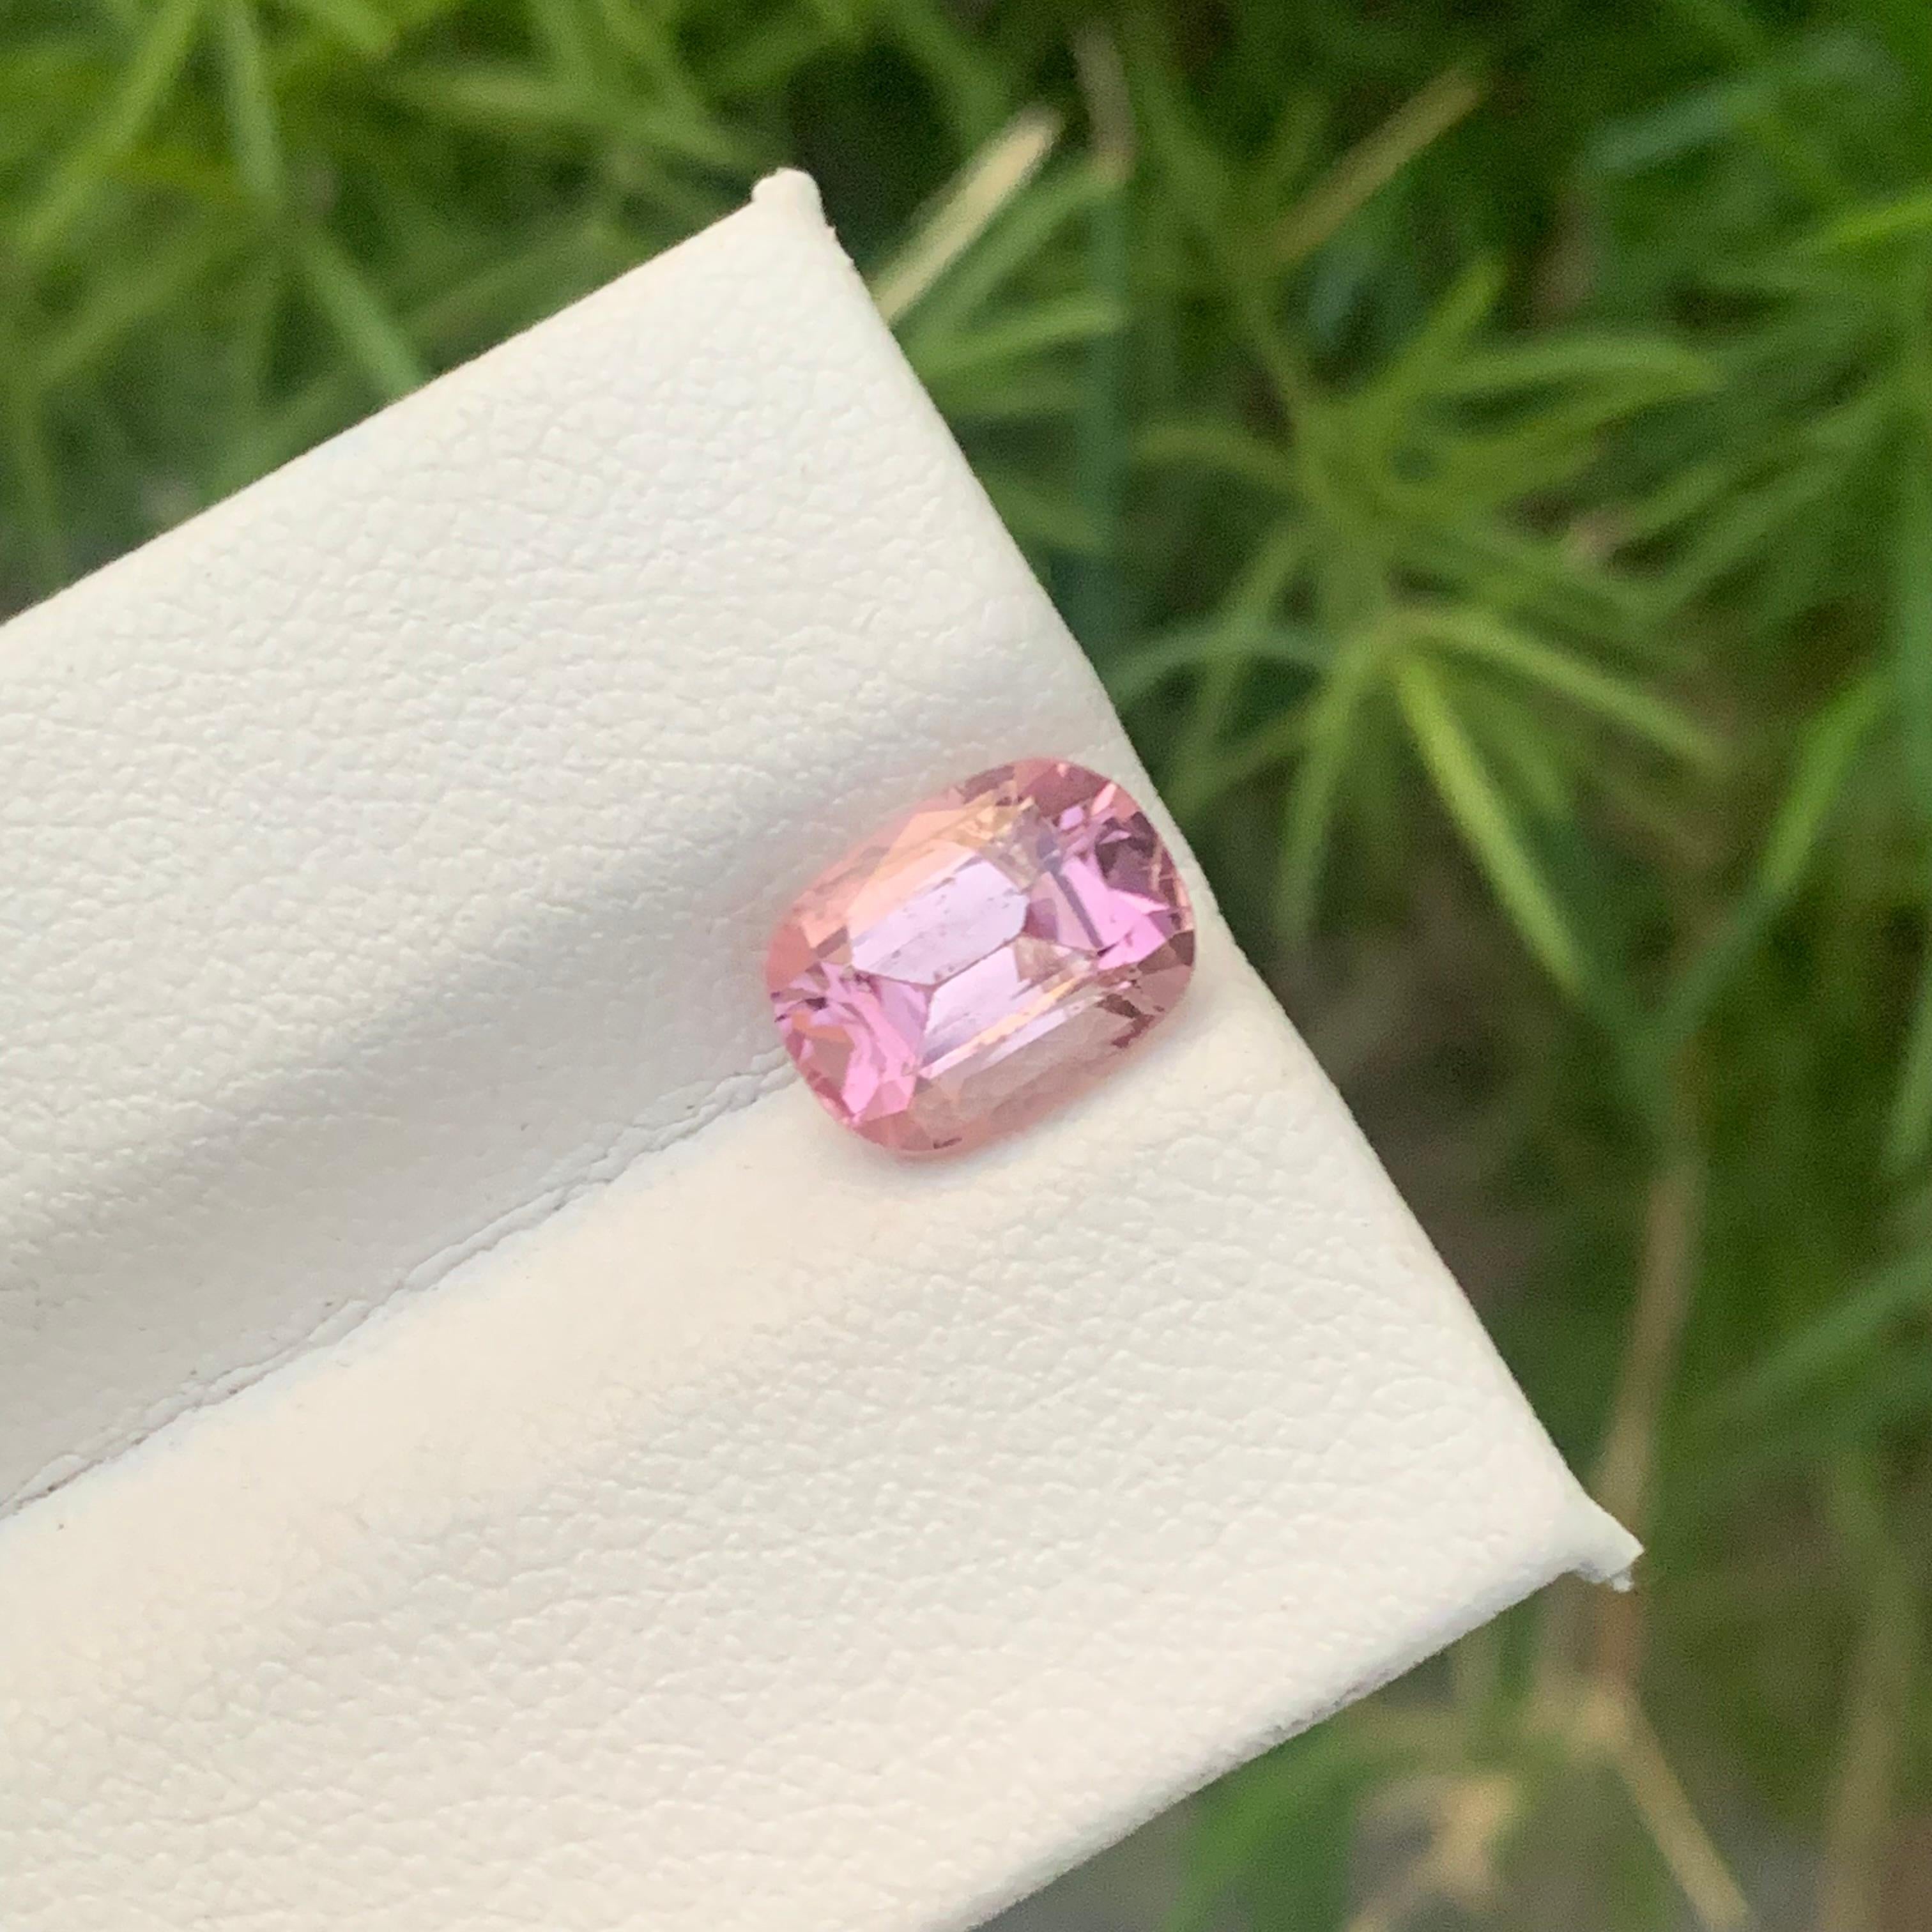 Faceted Tourmaline
Weight: 2.20 Carats
Dimension: 9x6.7x5.2 Mm
Origin: Kunar Afghanistan
Color: Pink
Shape: Mix Cushion
Clarity: Eye Clean
Certificate: On Demand

With a rating between 7 and 7.5 on the Mohs scale of mineral hardness, tourmaline